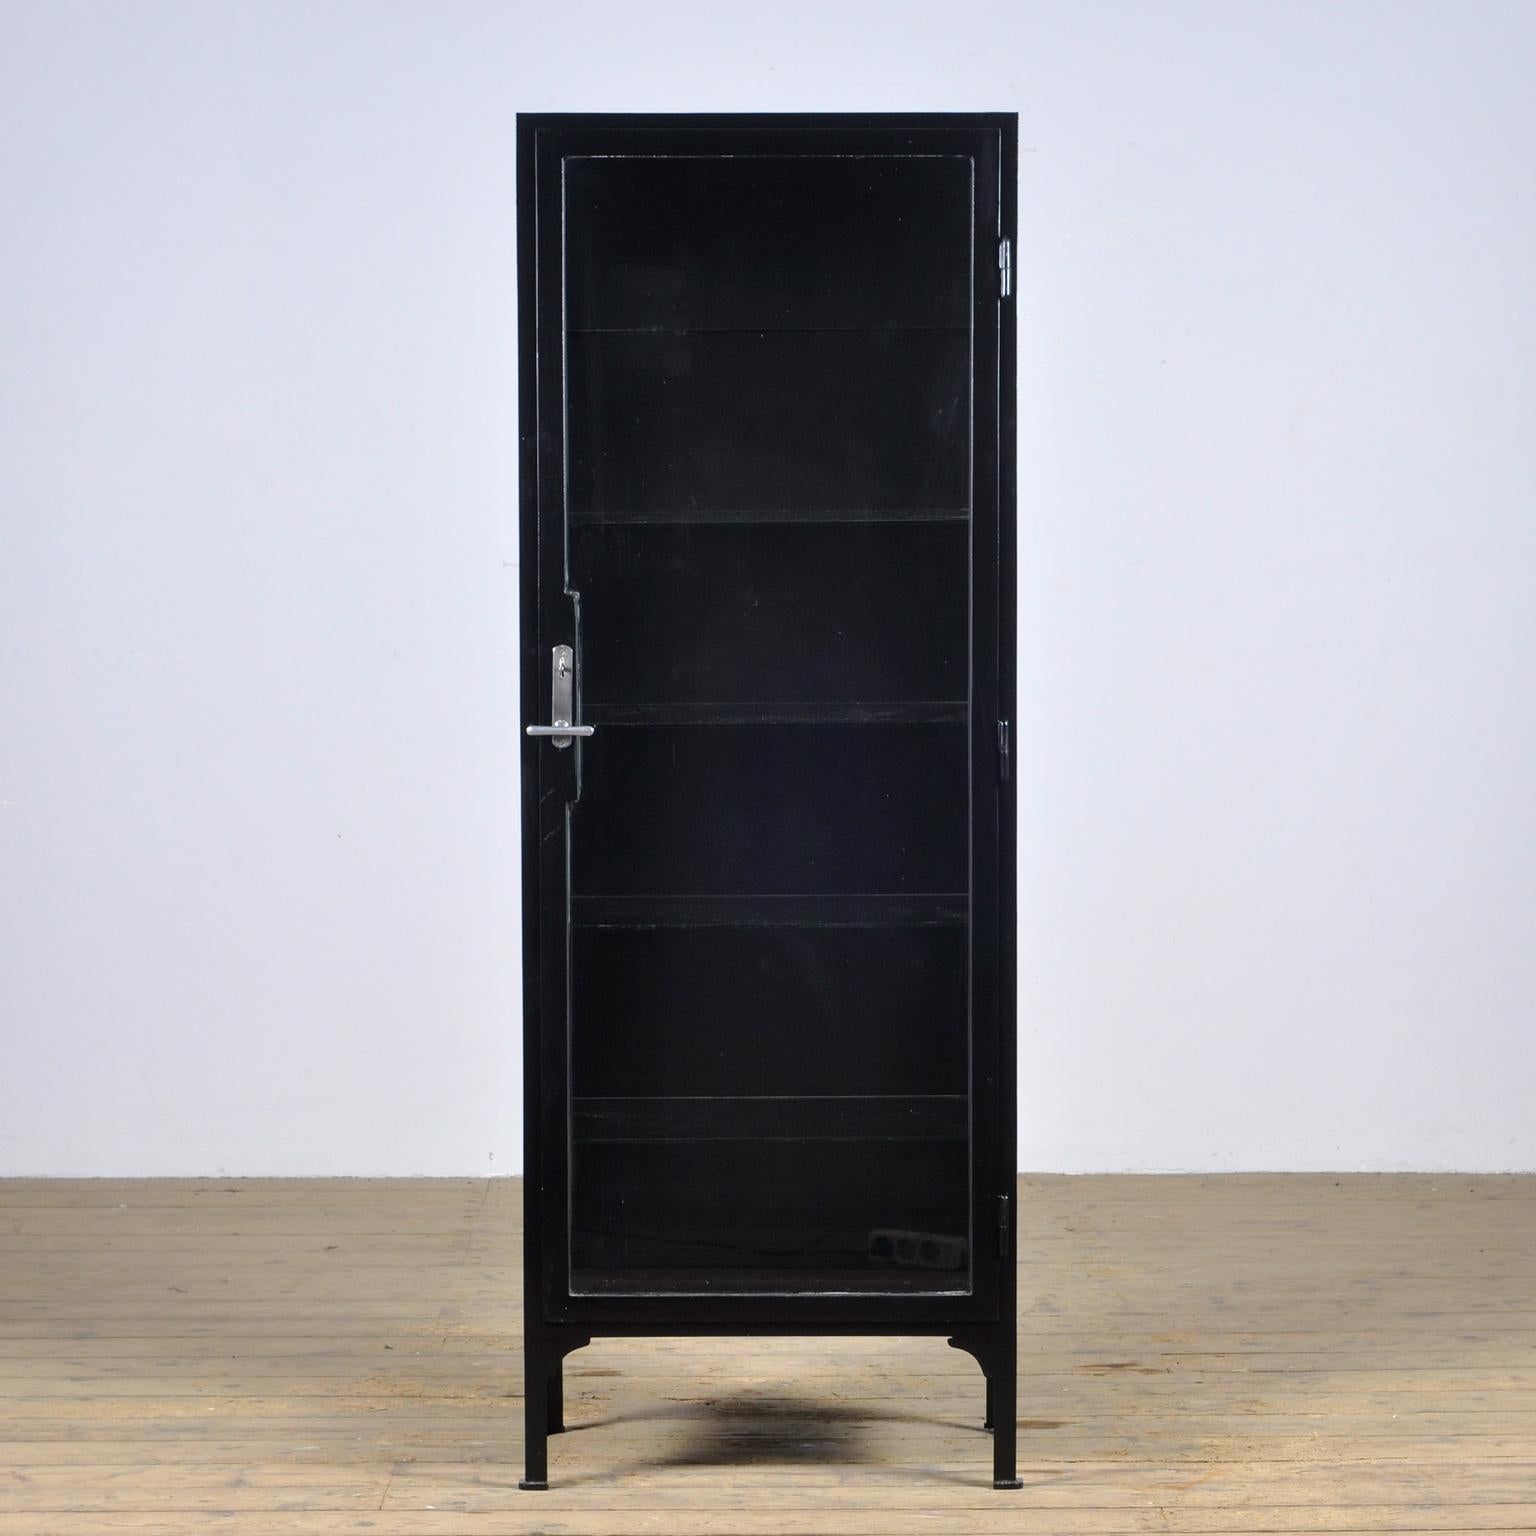 Medical cabinet from the 1930s. The cabinet is produced in hungary and is made of thick iron and antique glass. The lock and handle are original and functional.
The cabinet has been painted black recently.